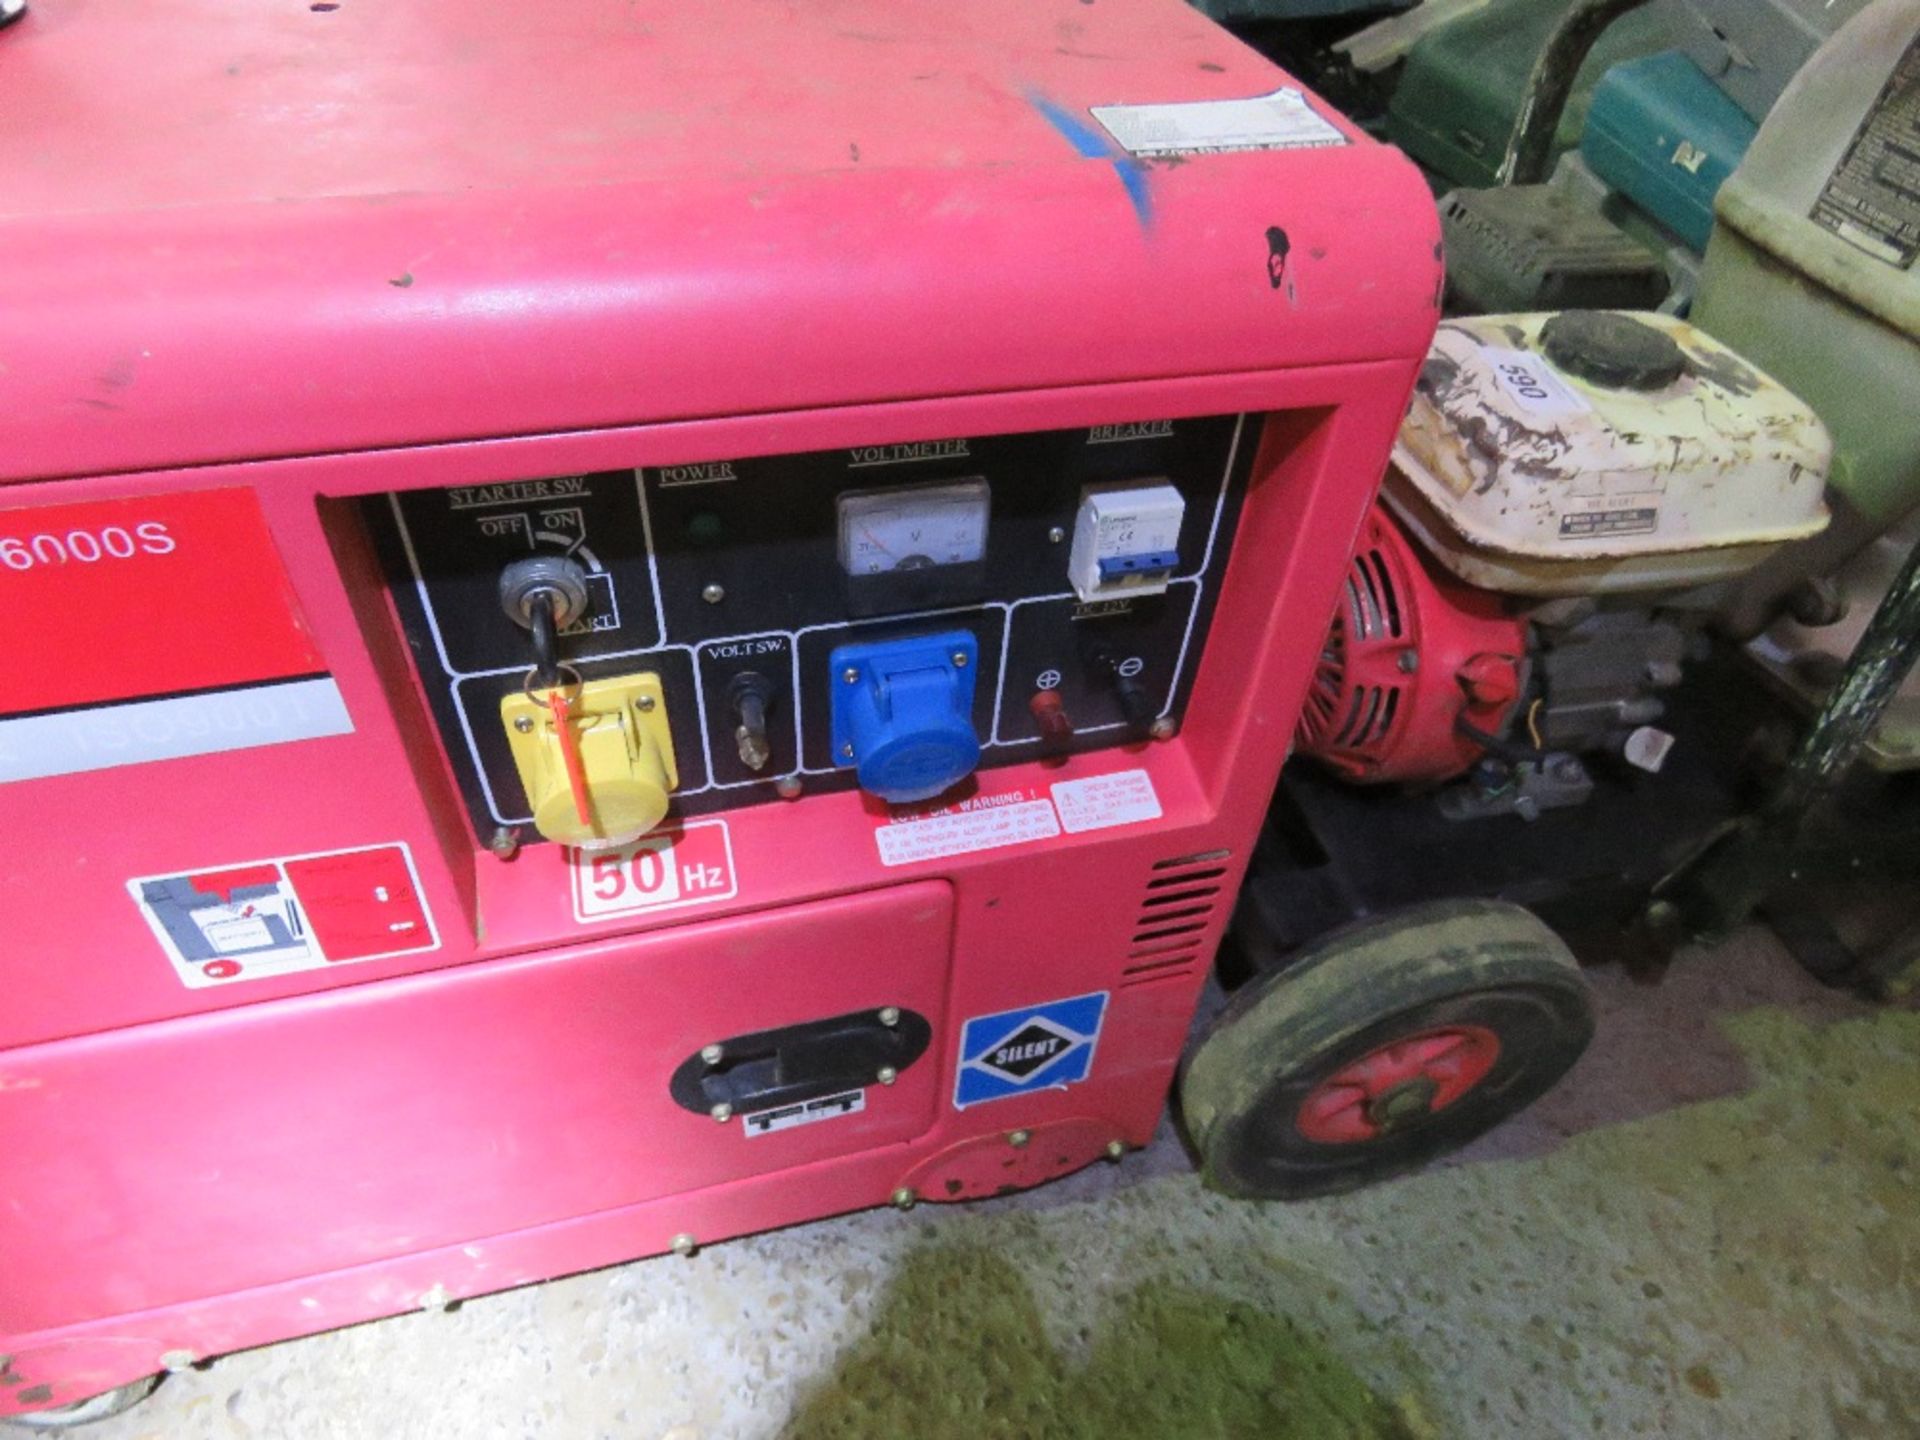 LAUNTOP DIESEL ENGINED WHEELED GENERATOR, 6KVA APPROX. - Image 2 of 3